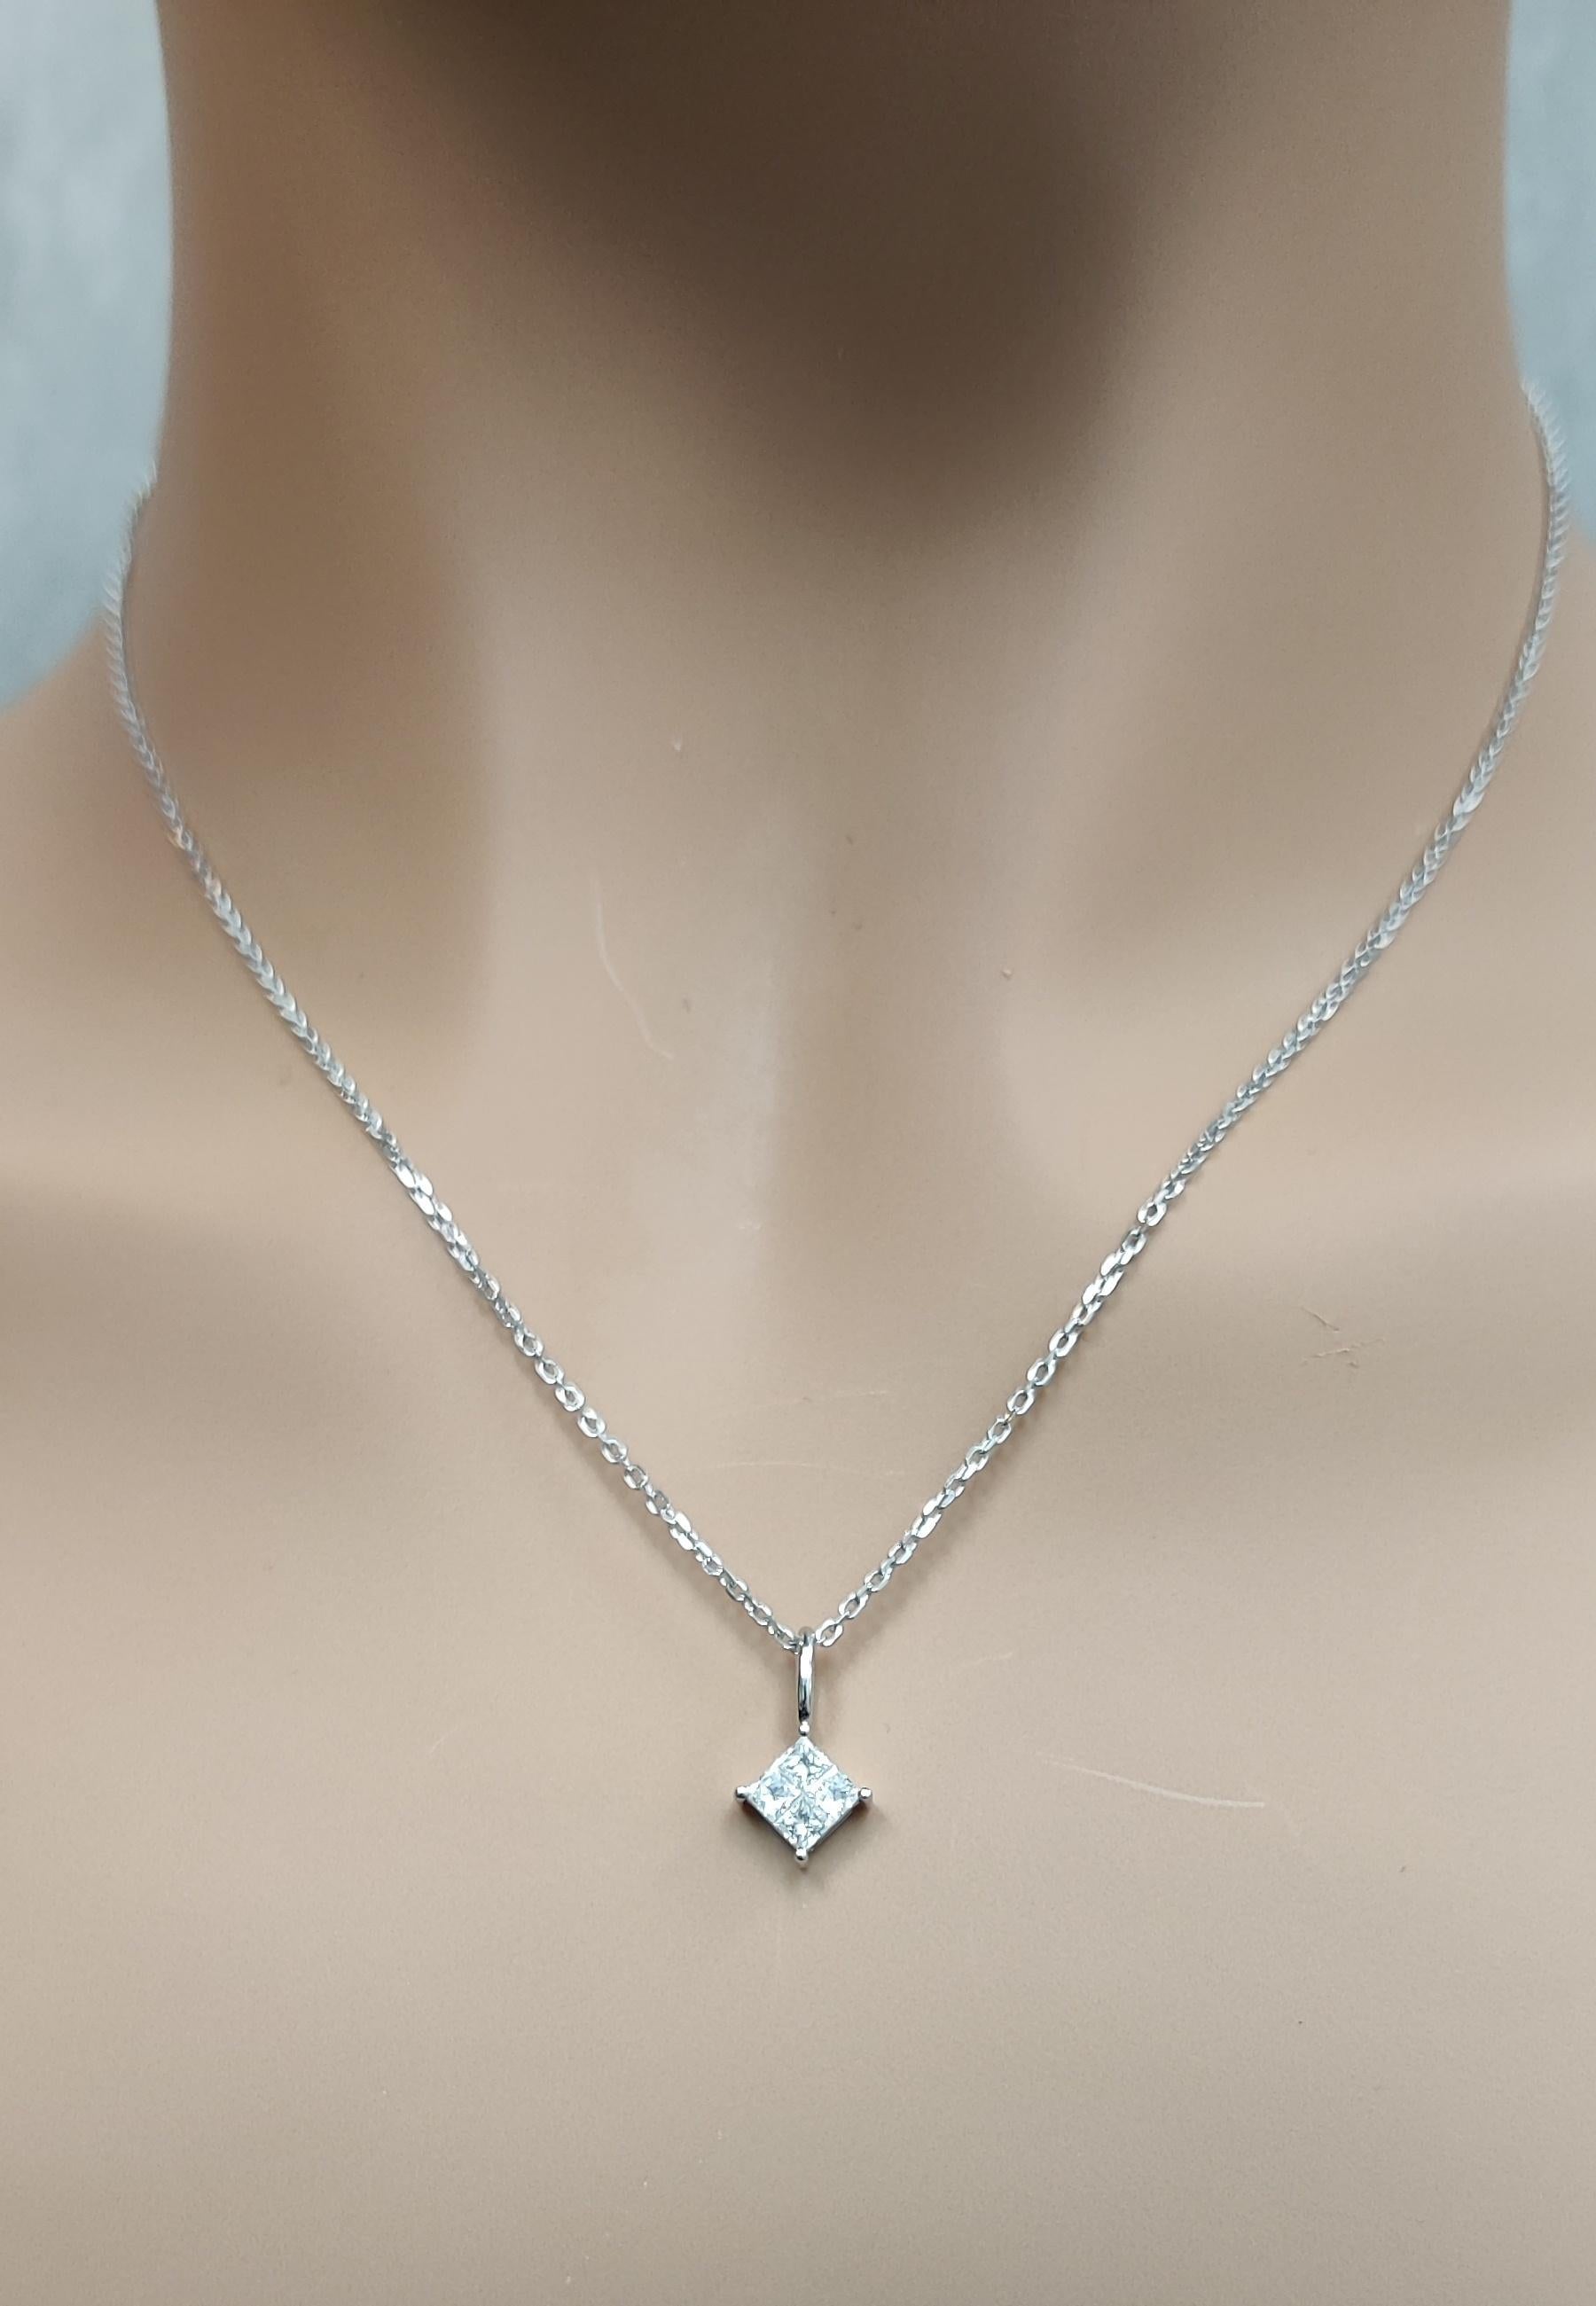 RareGemWorld's classic diamond pendant. Mounted in a beautiful 18K White Gold setting with natural round white diamond melee. This pendant is guaranteed to impress and enhance your personal collection.

Total Weight: .37cts

Natural Round White